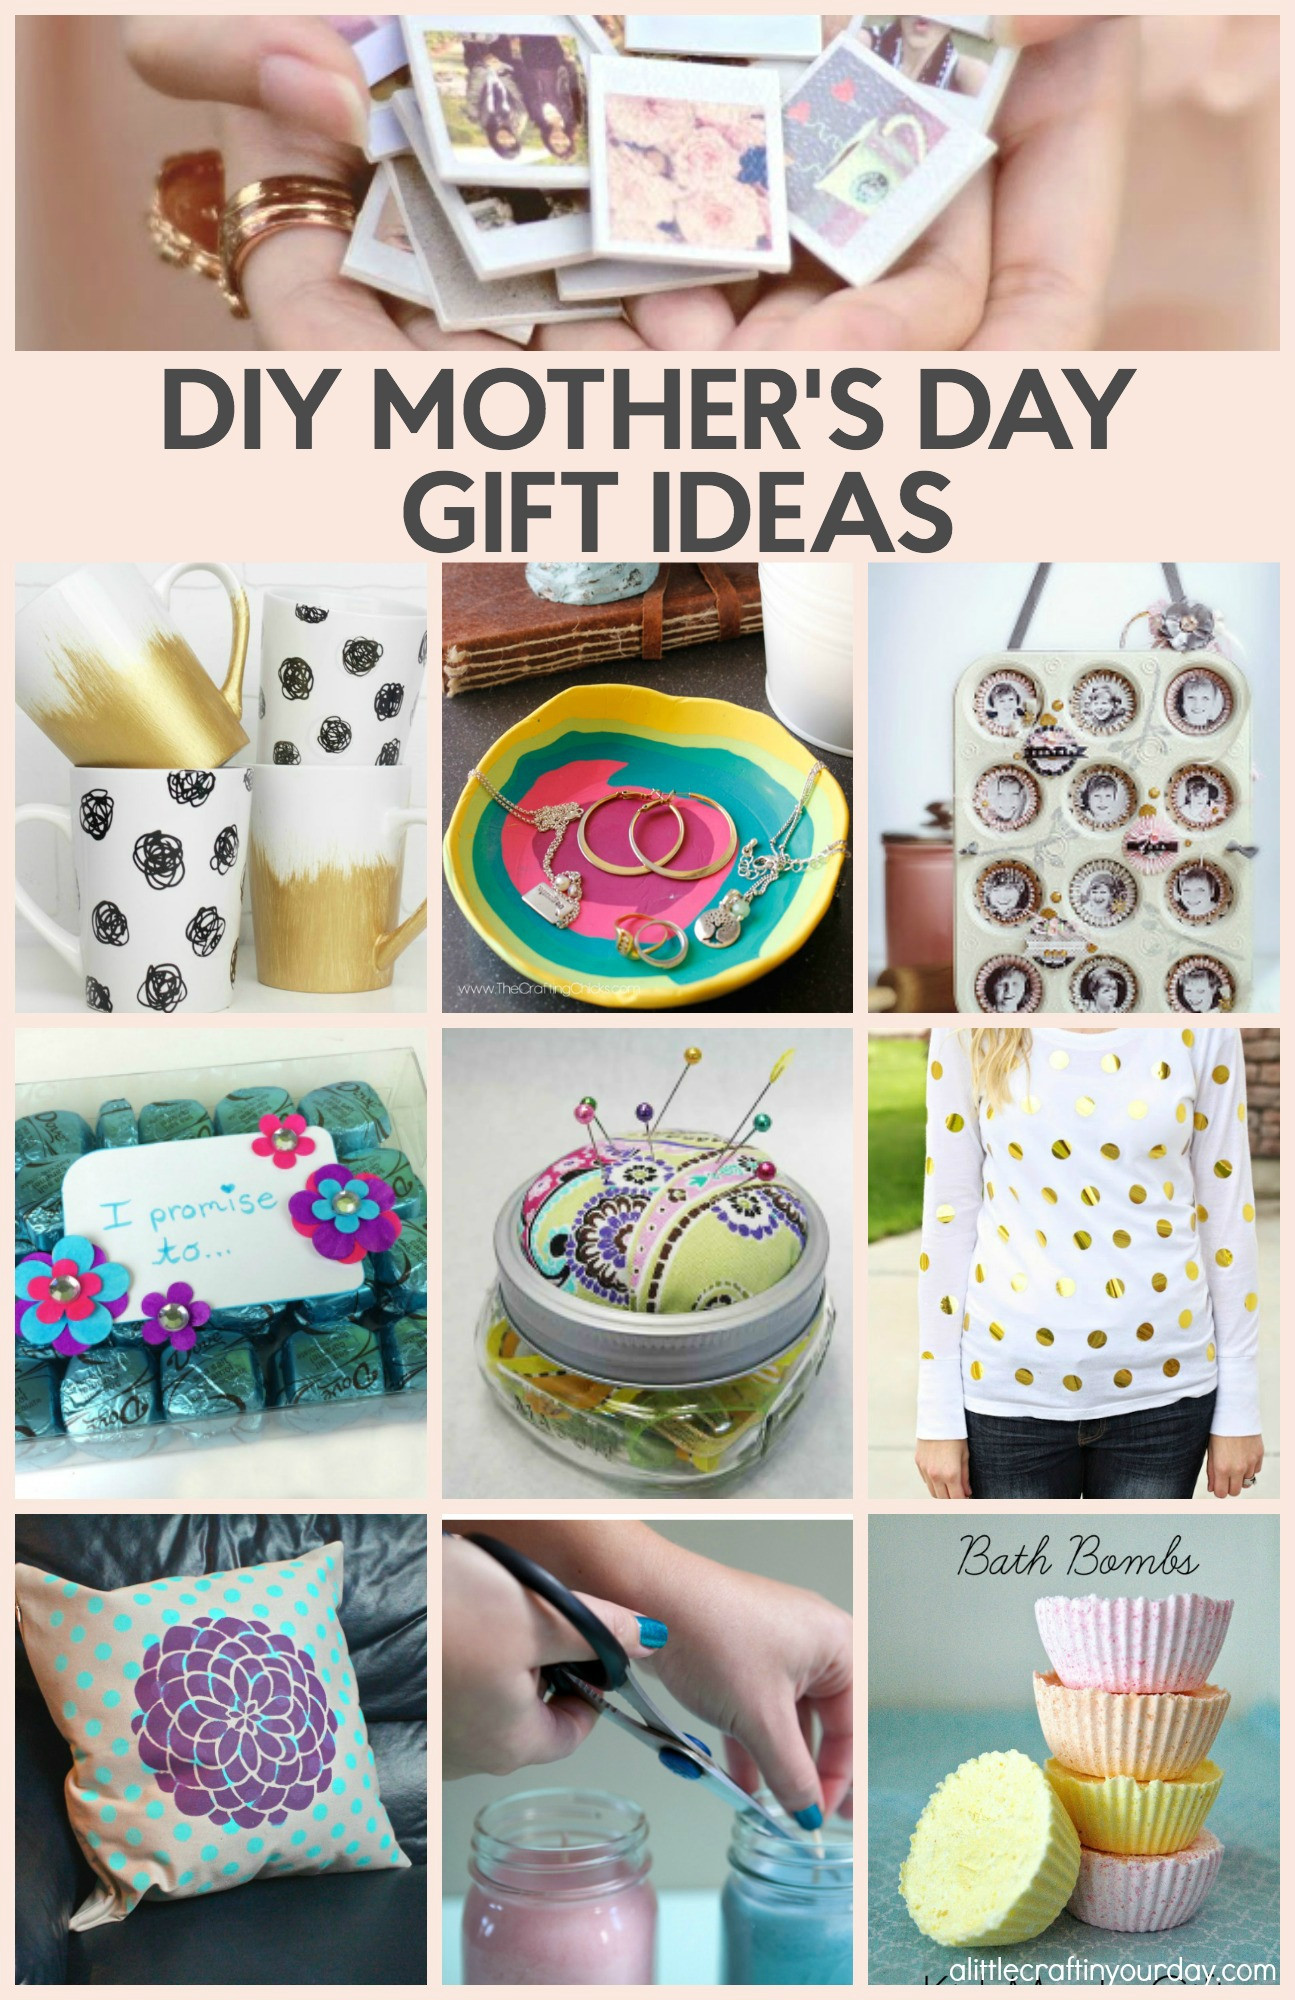 Mother's Day Gift Ideas 2016
 15 Cute Mother’s Day Gift Ideas She’ll Love A Little